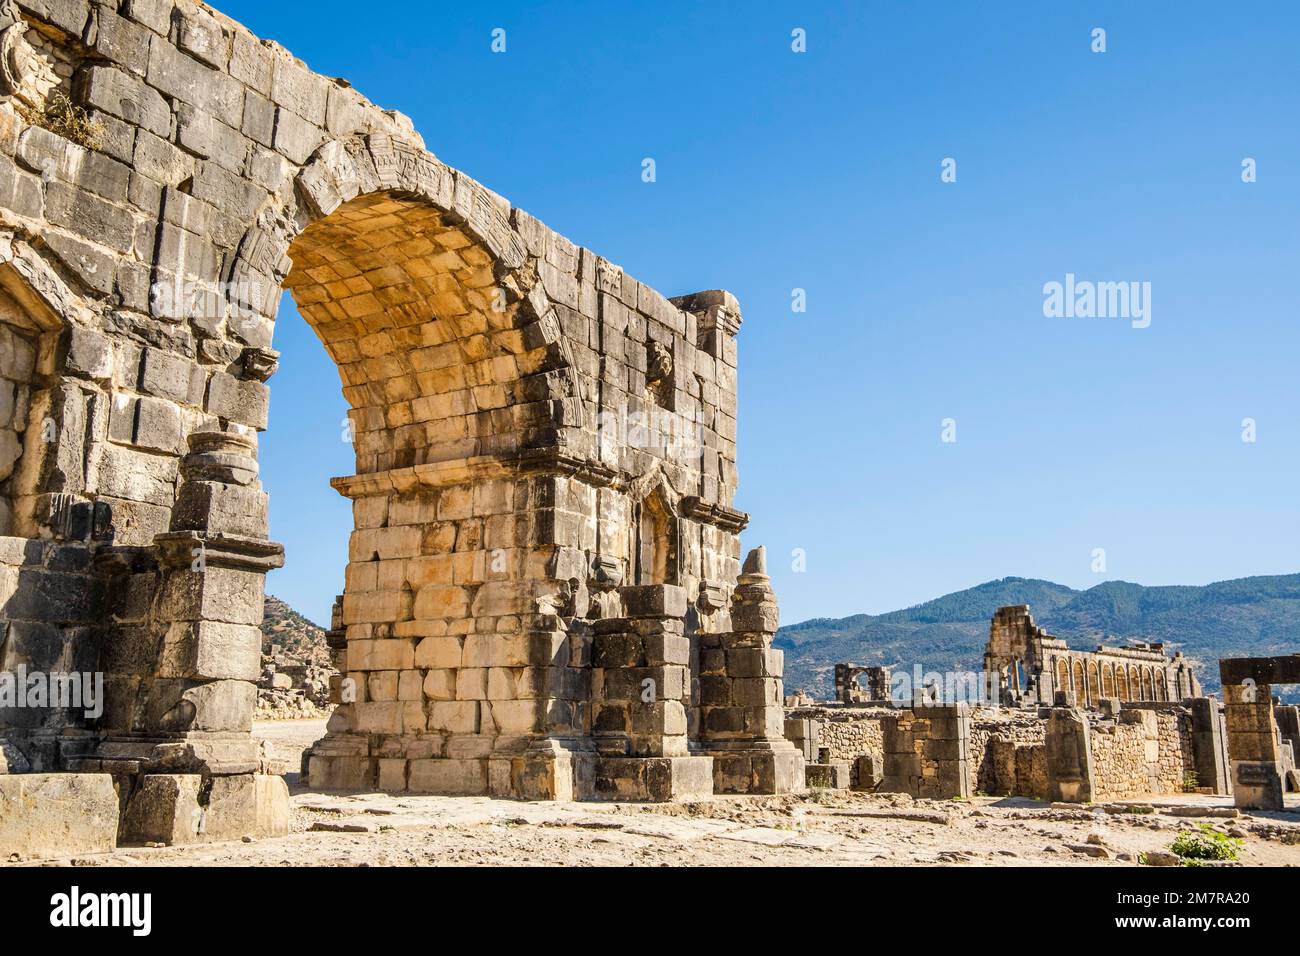 Well-preserved roman ruins in Volubilis, Fez Meknes area, Morocco, Northern Africa Stock Photo